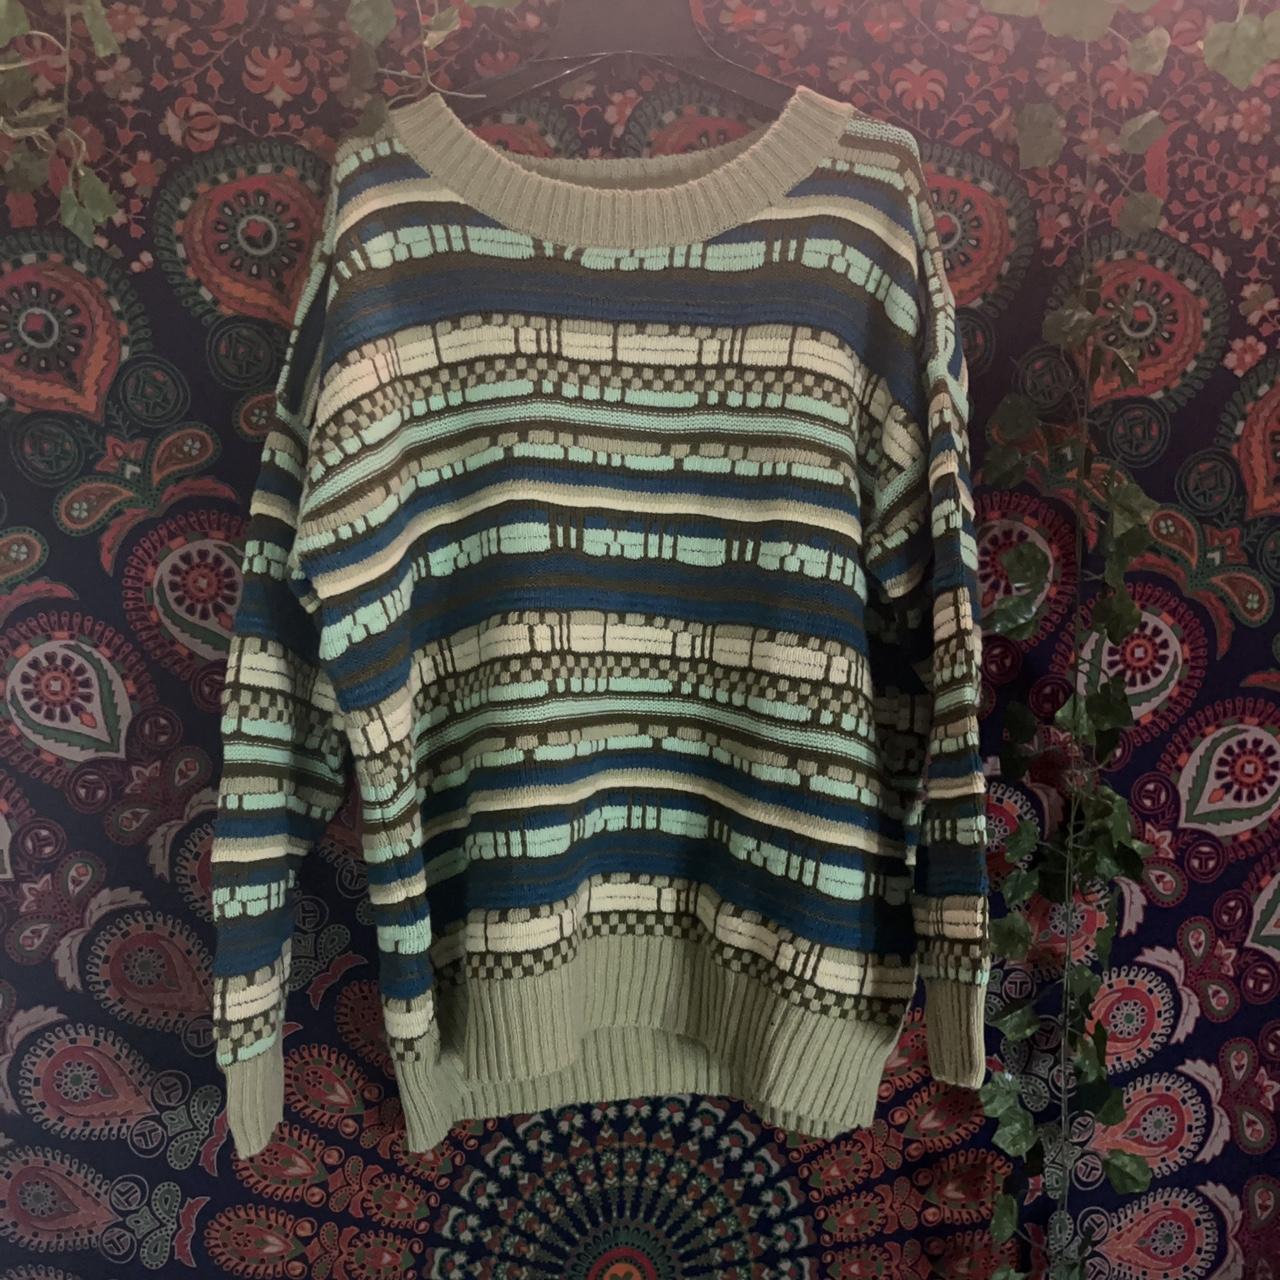 wild fable sweater. super comfy and never worn! i - Depop